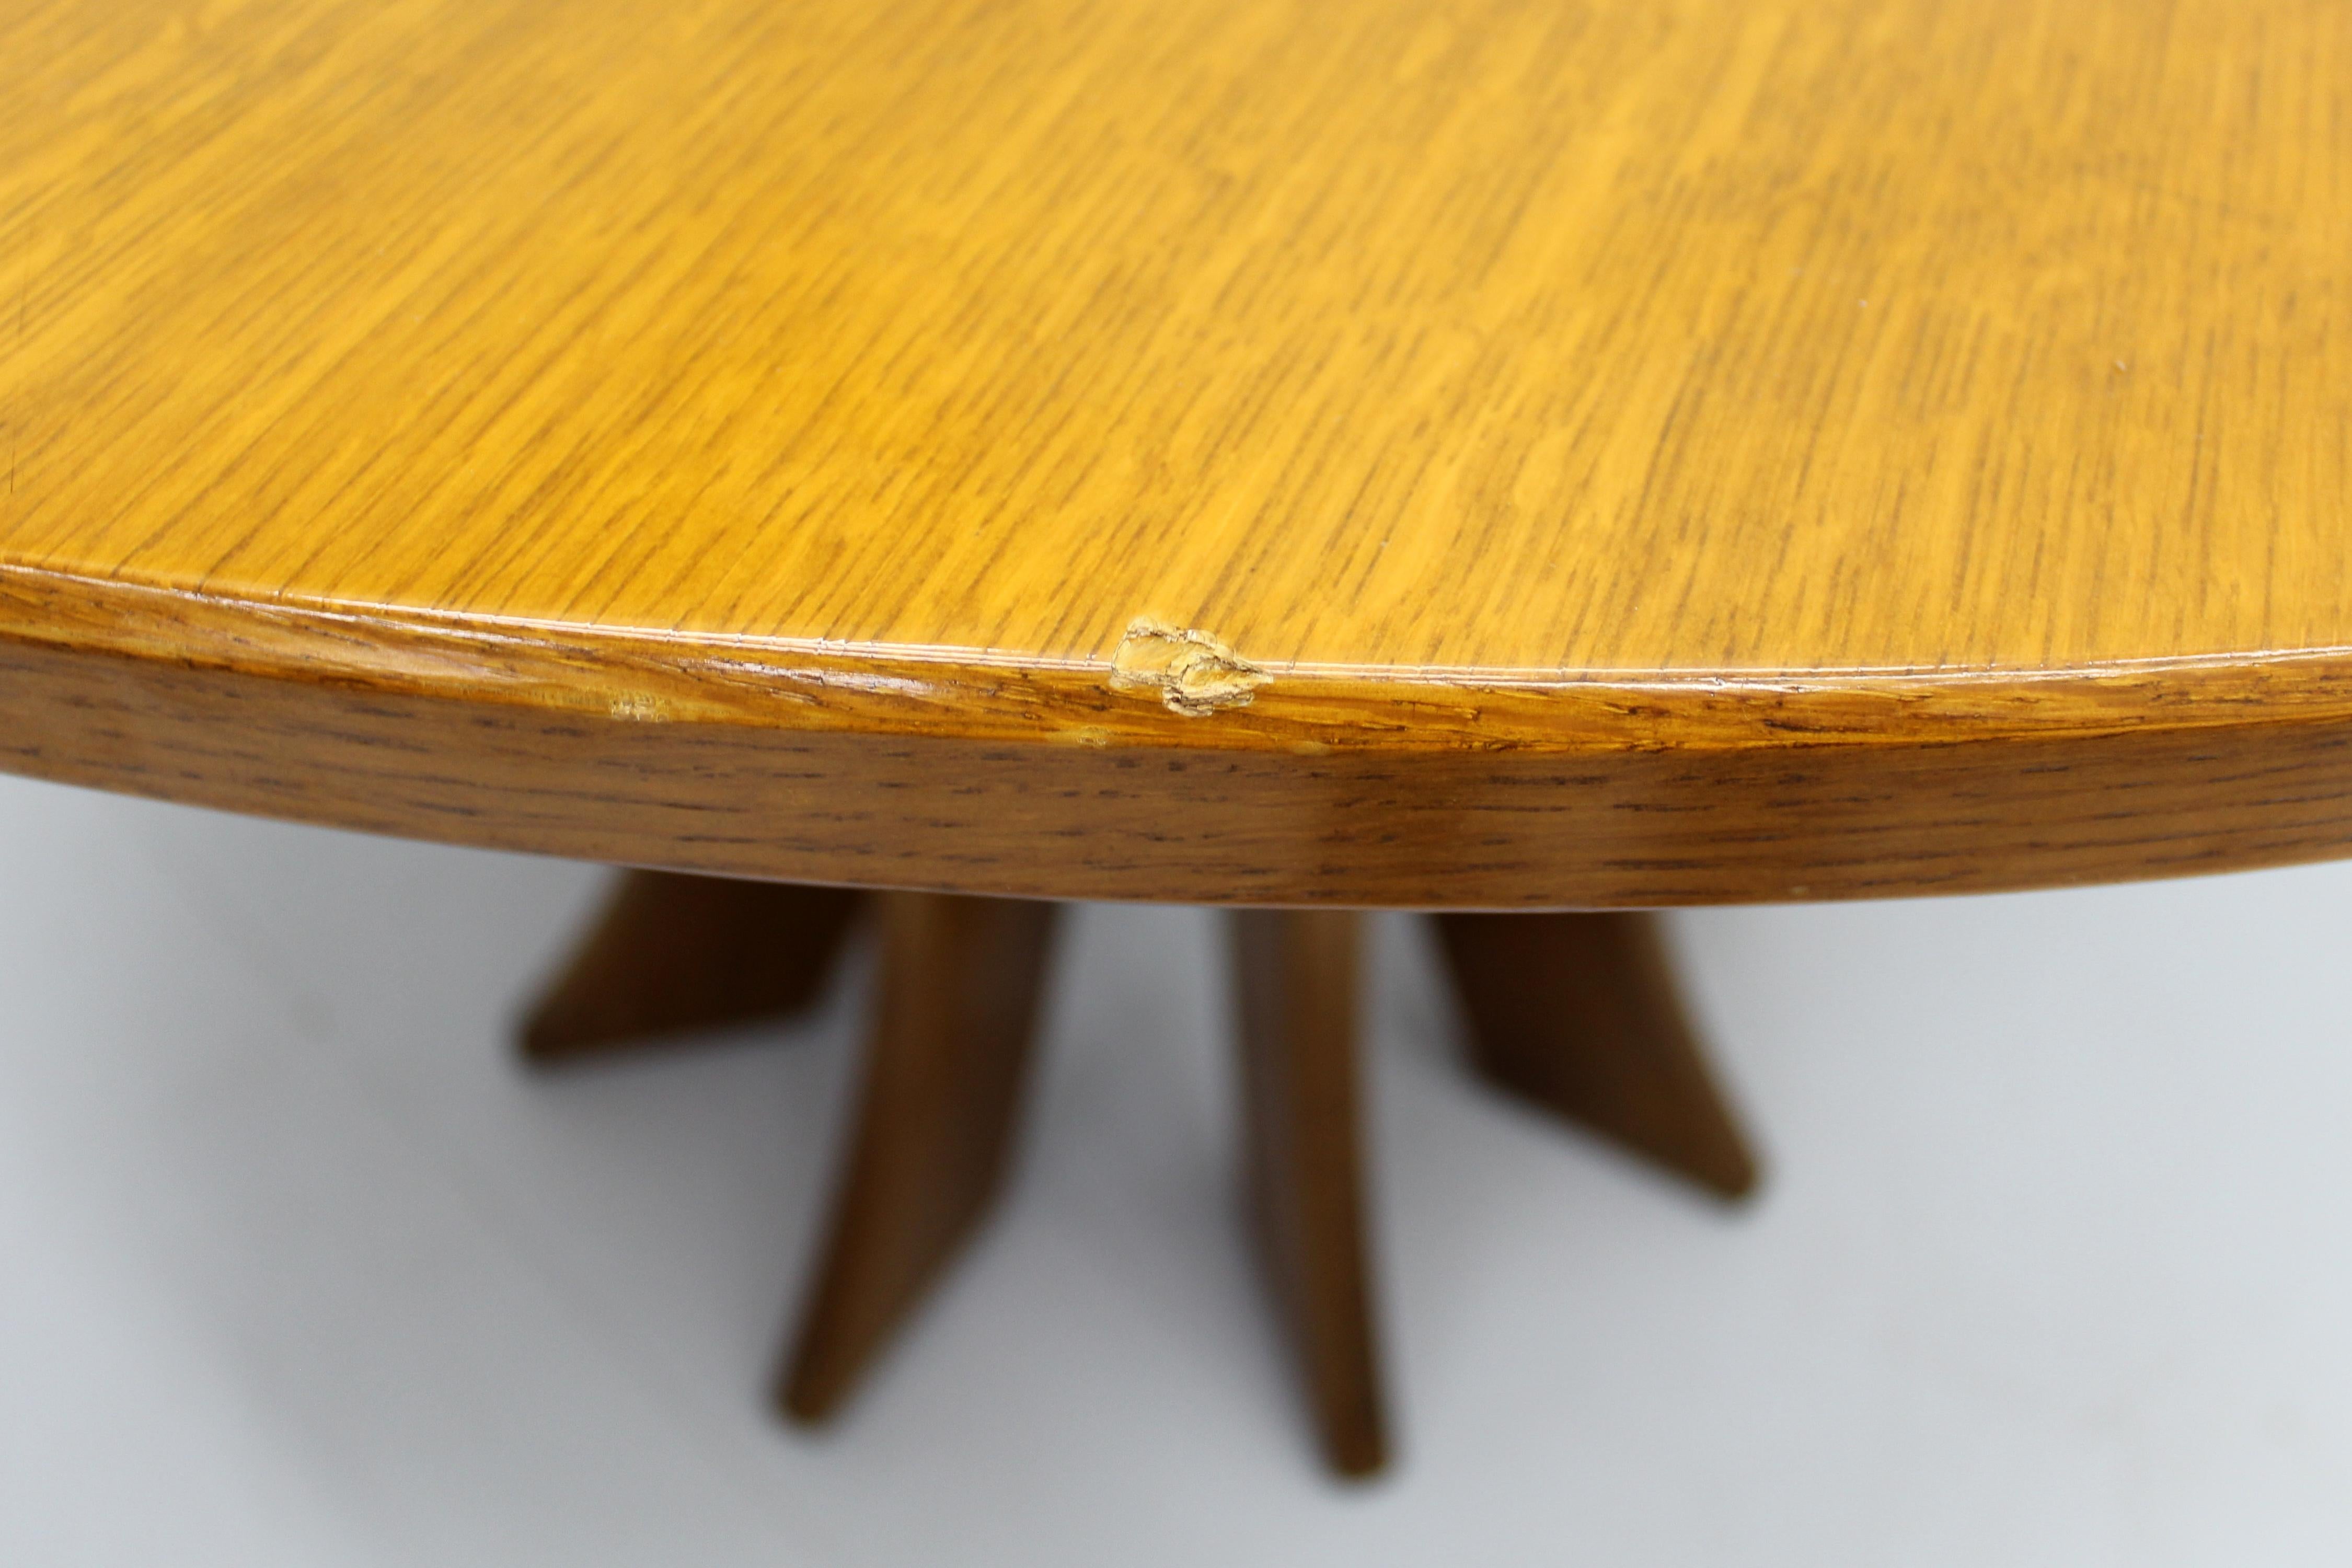 Mid-Century A. Mangiarotti style Wooden Round Diner Table 70s Italy For Sale 4